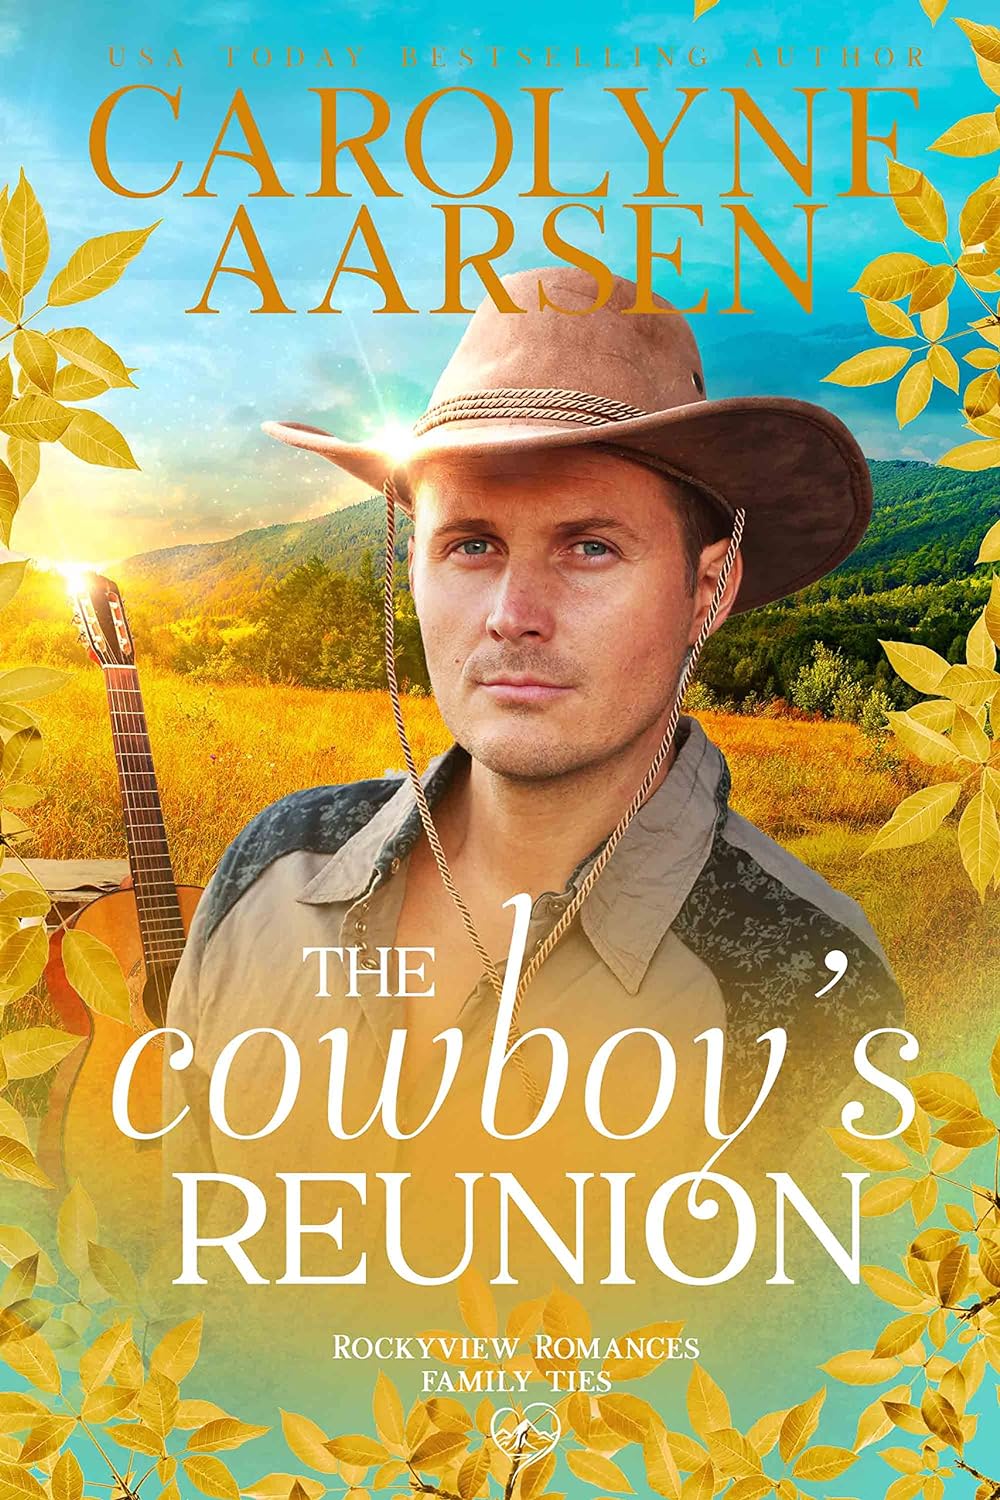 The Cowboys Reunion weet Western Rockyview Romance by USA Today Bestselling Author Carolyne Aarsen